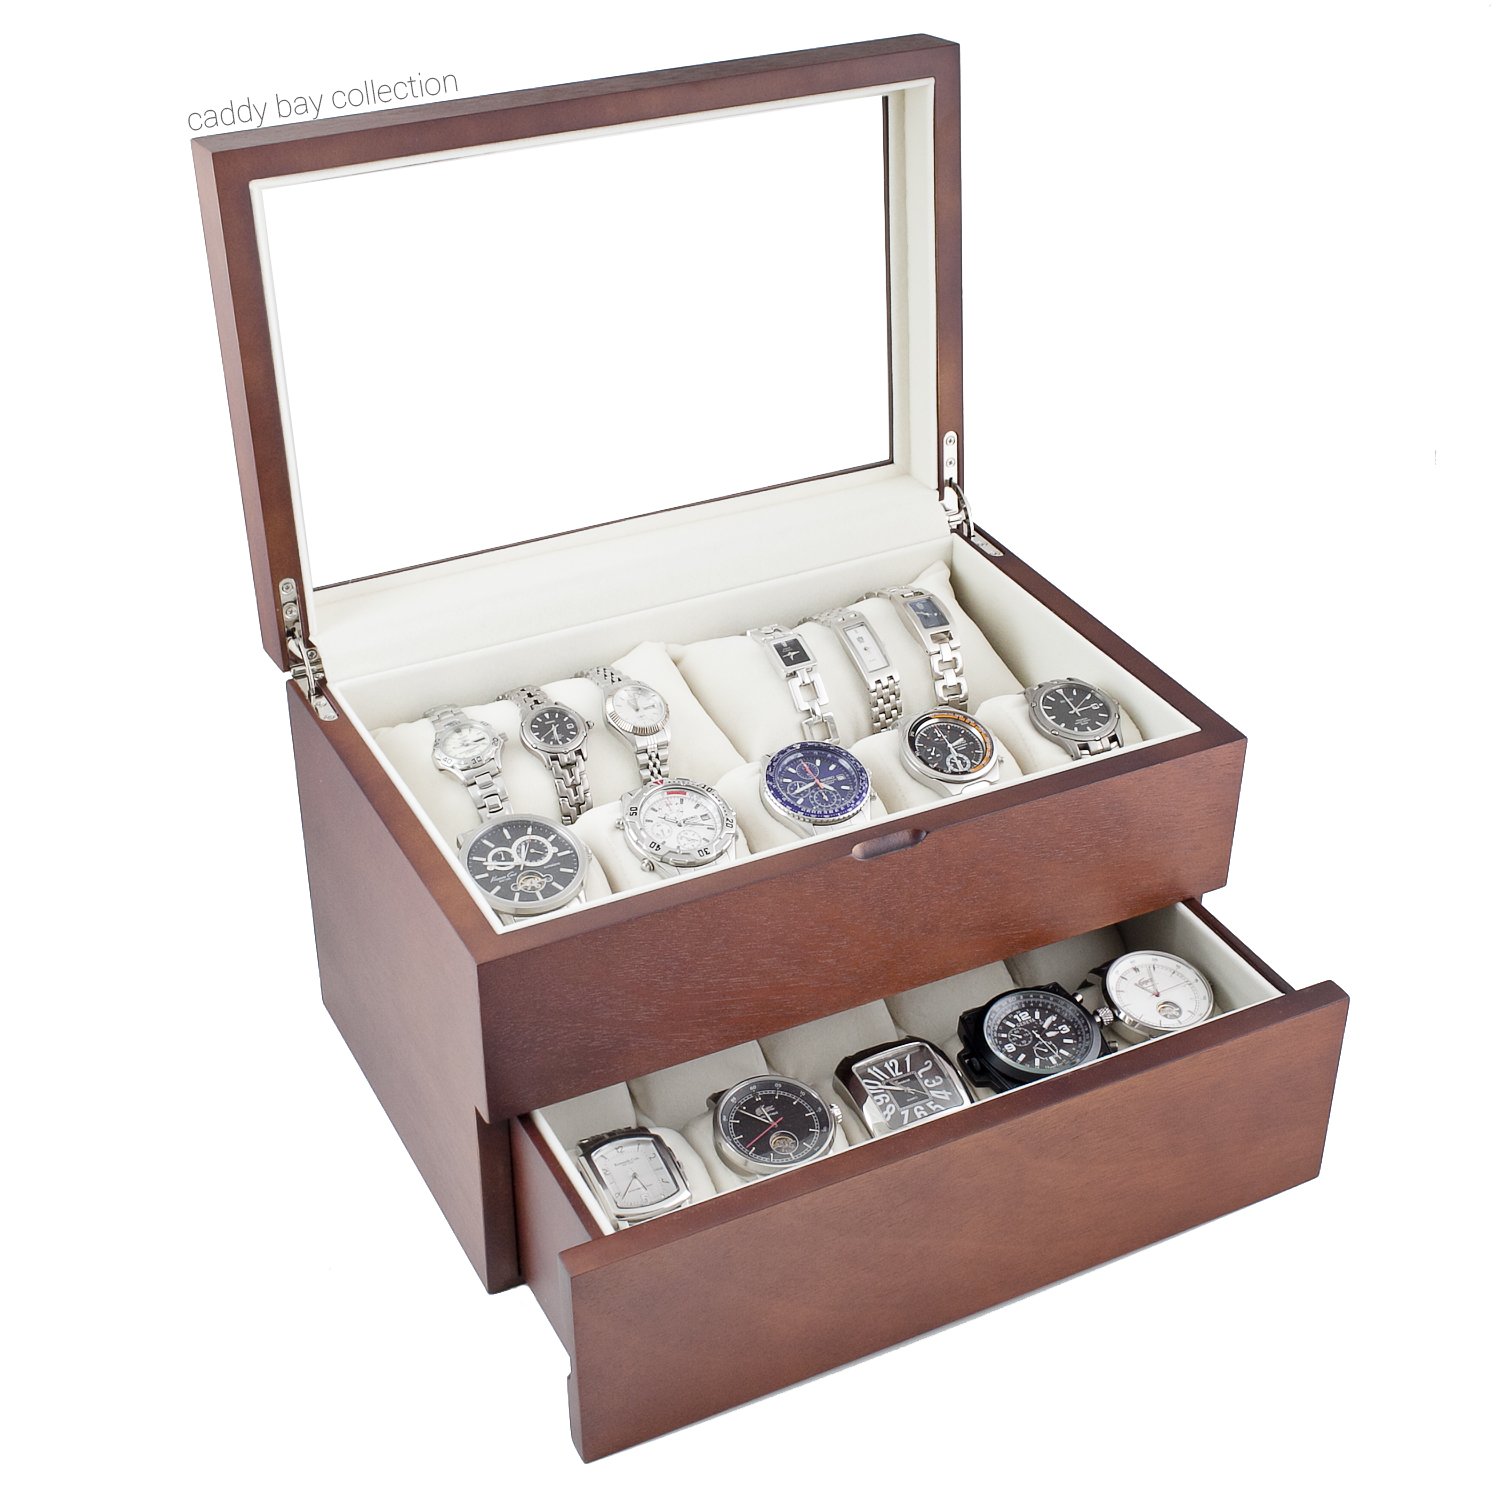 Caddy Bay Collection Vintage Wood Watch Case Display Storage Watch Box Glass Top Holds 20+ Watches With Adjustable Soft Pillows and High Clearance for Larger Watches